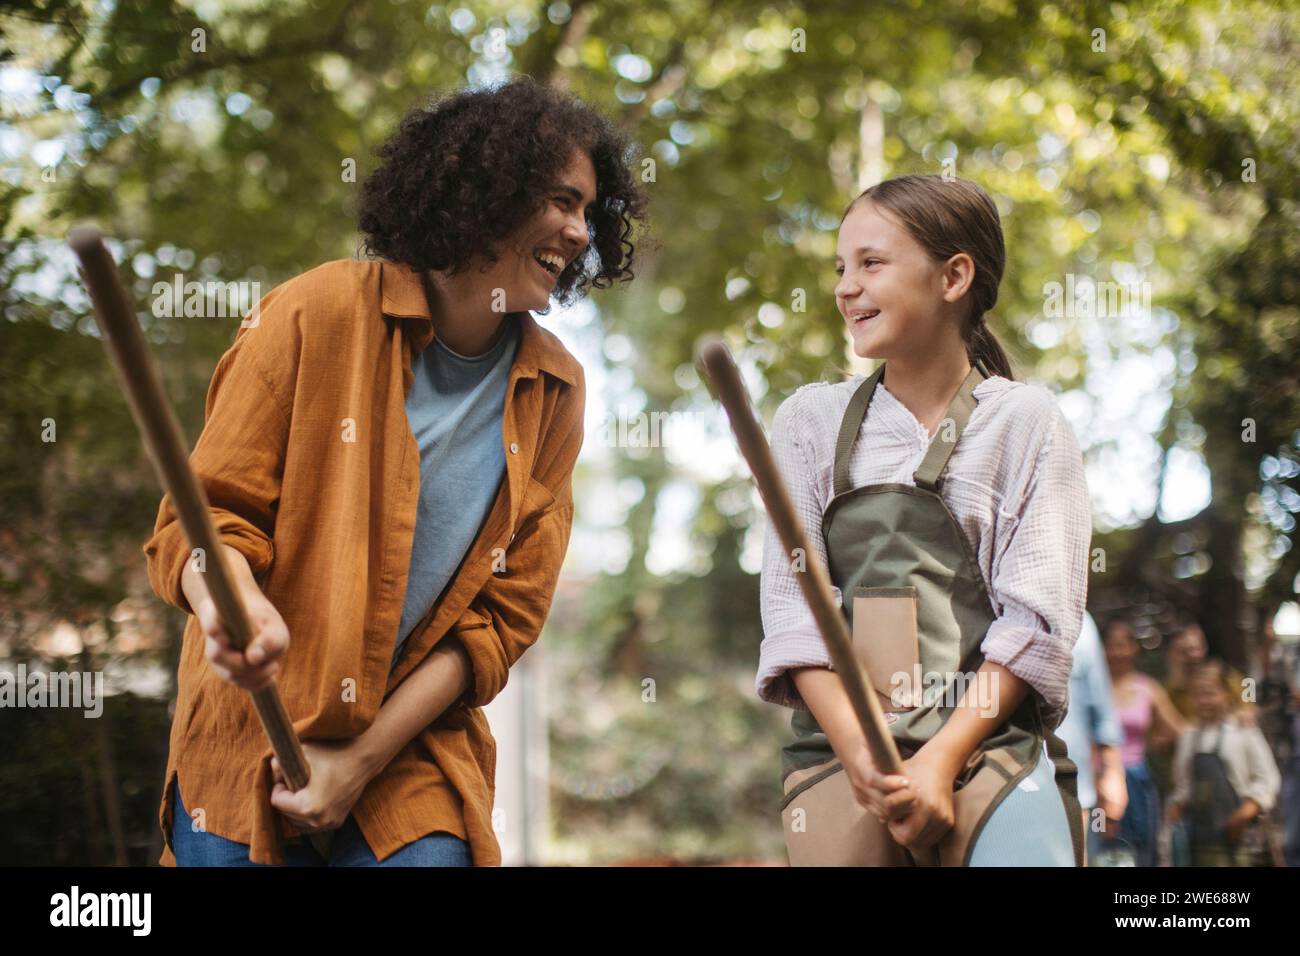 Woman and girl pretending to ride on broom sticks at community garden Stock Photo